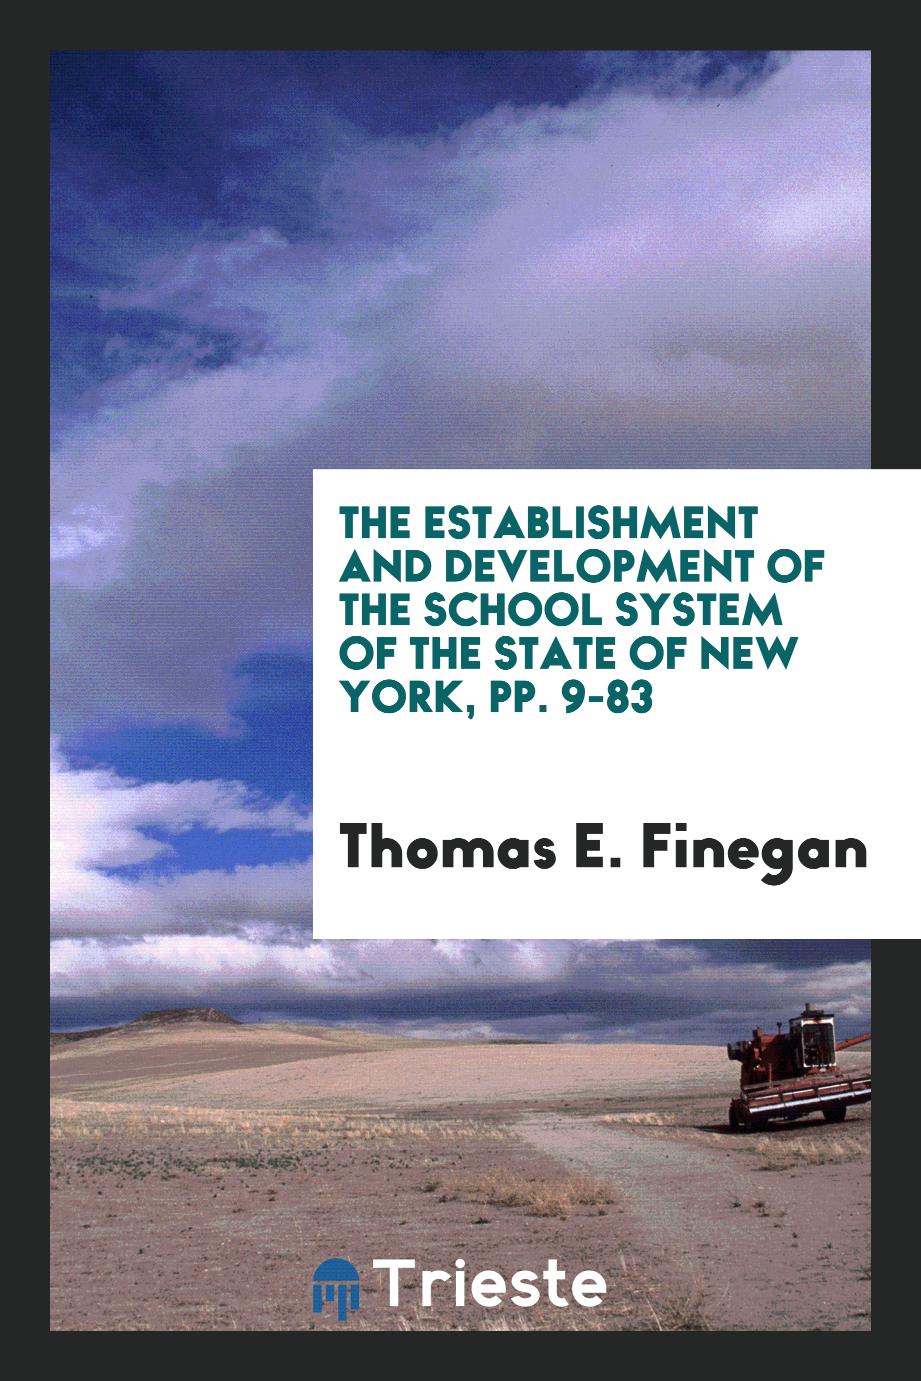 The Establishment and Development of the School System of the State of New York, pp. 9-83